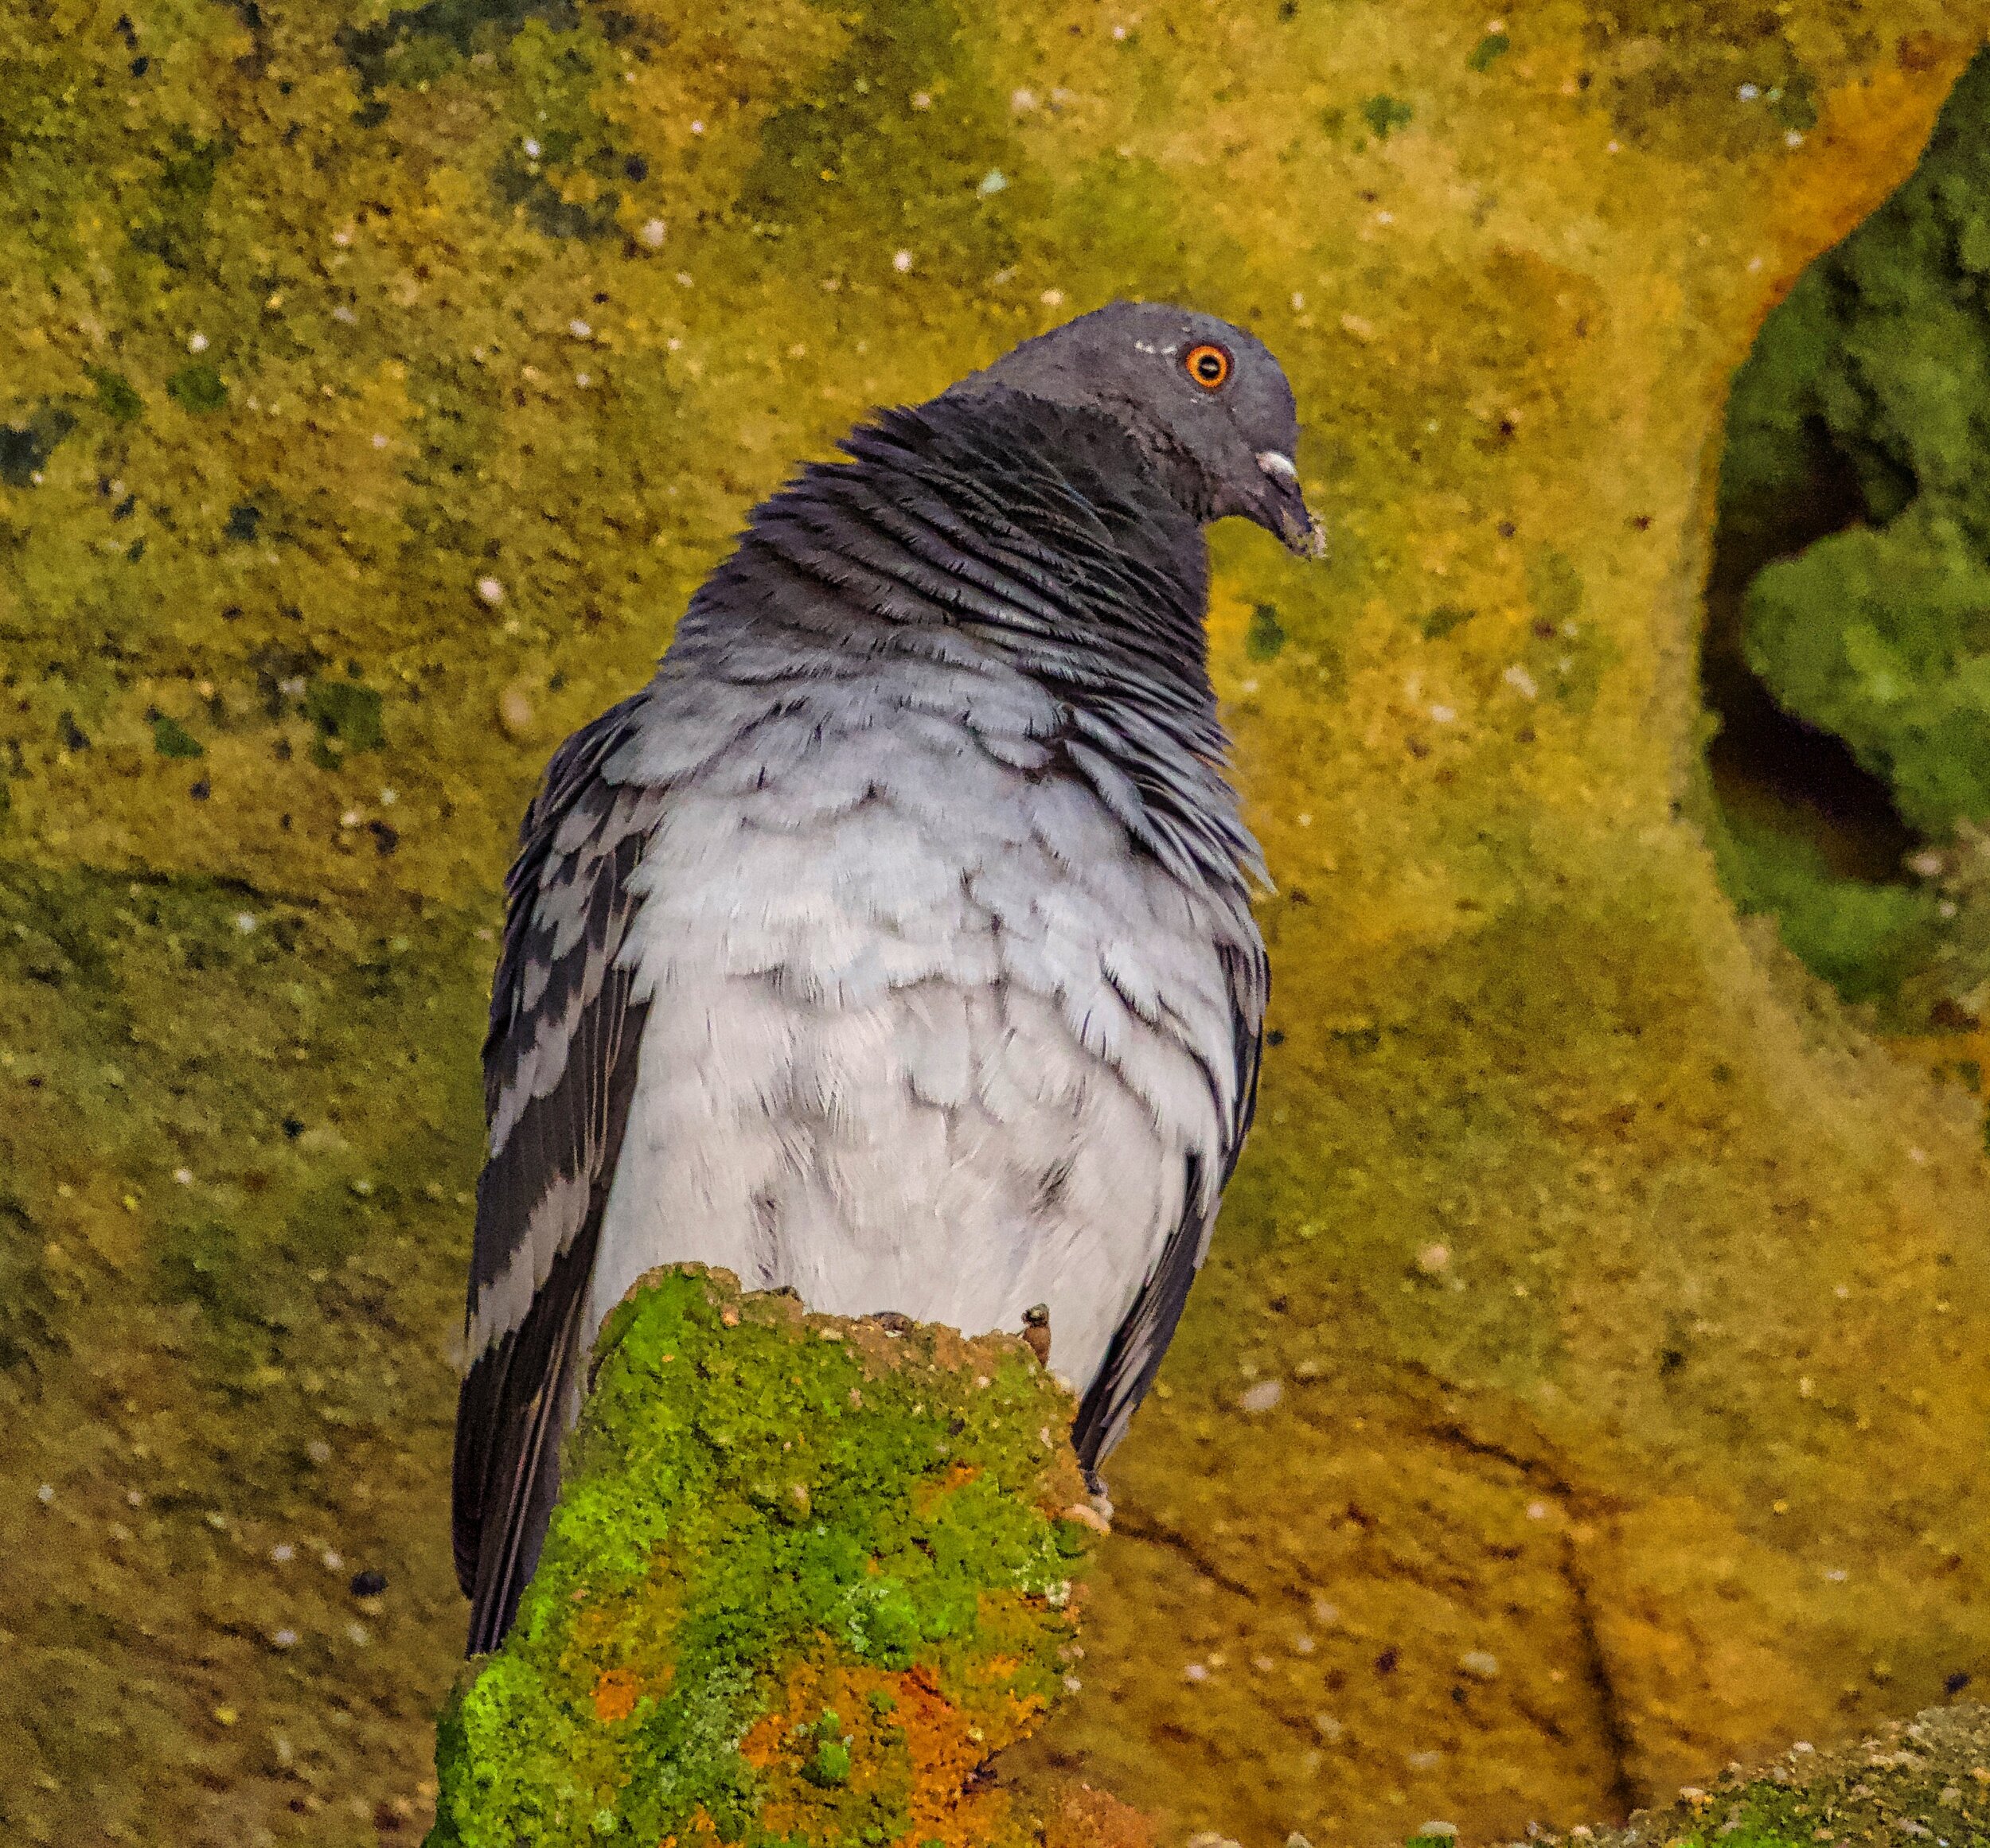 Rock Pigeon Identification, All About Birds, Cornell Lab of